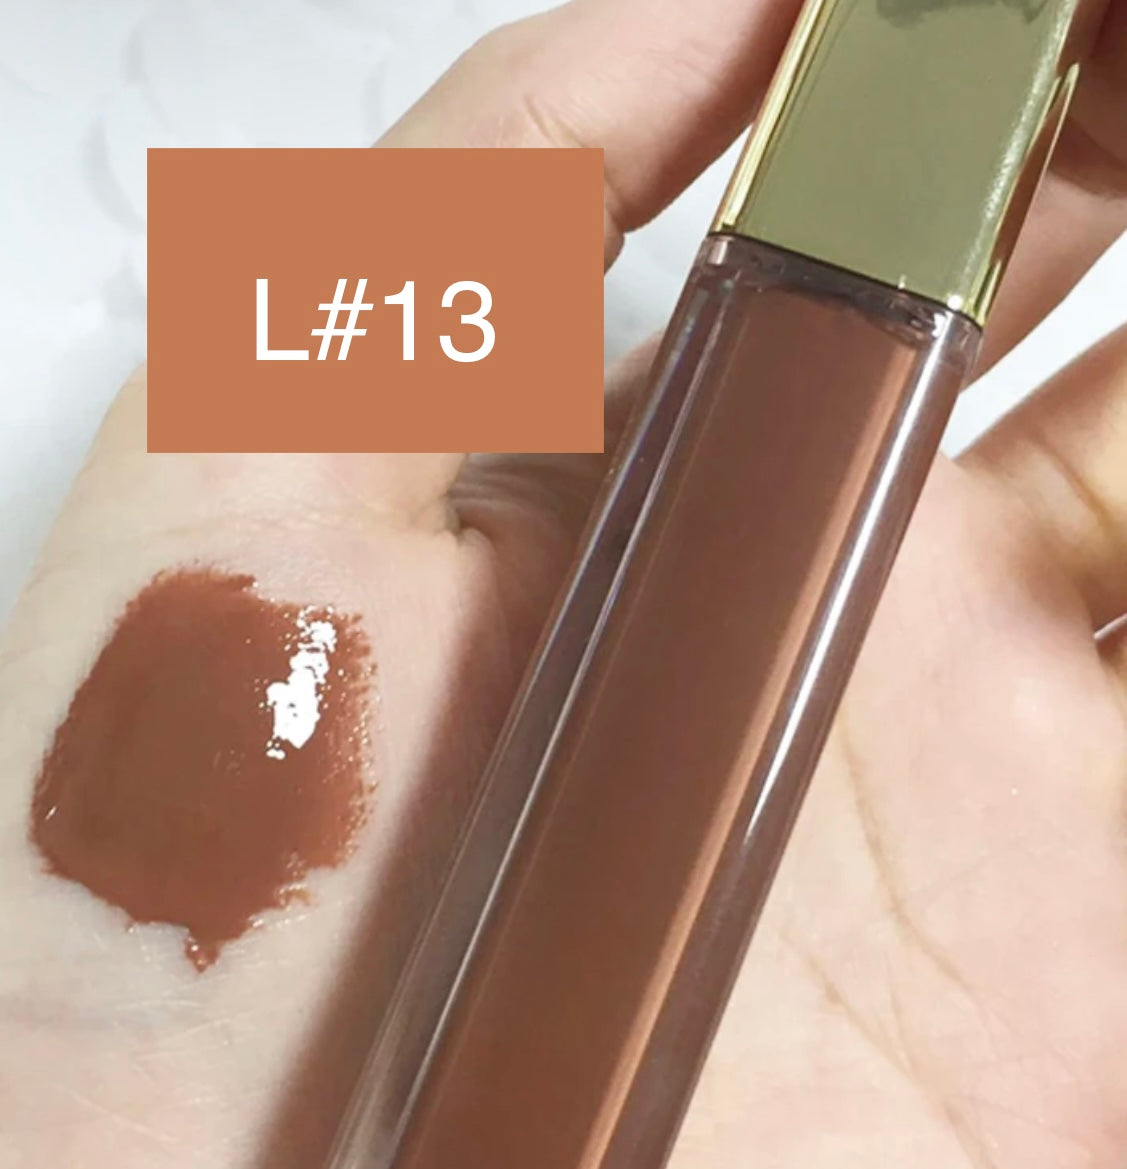 High-Shine Vegan Lip Gloss in variant of L13, providing a vibrant L13 with a glossy shine